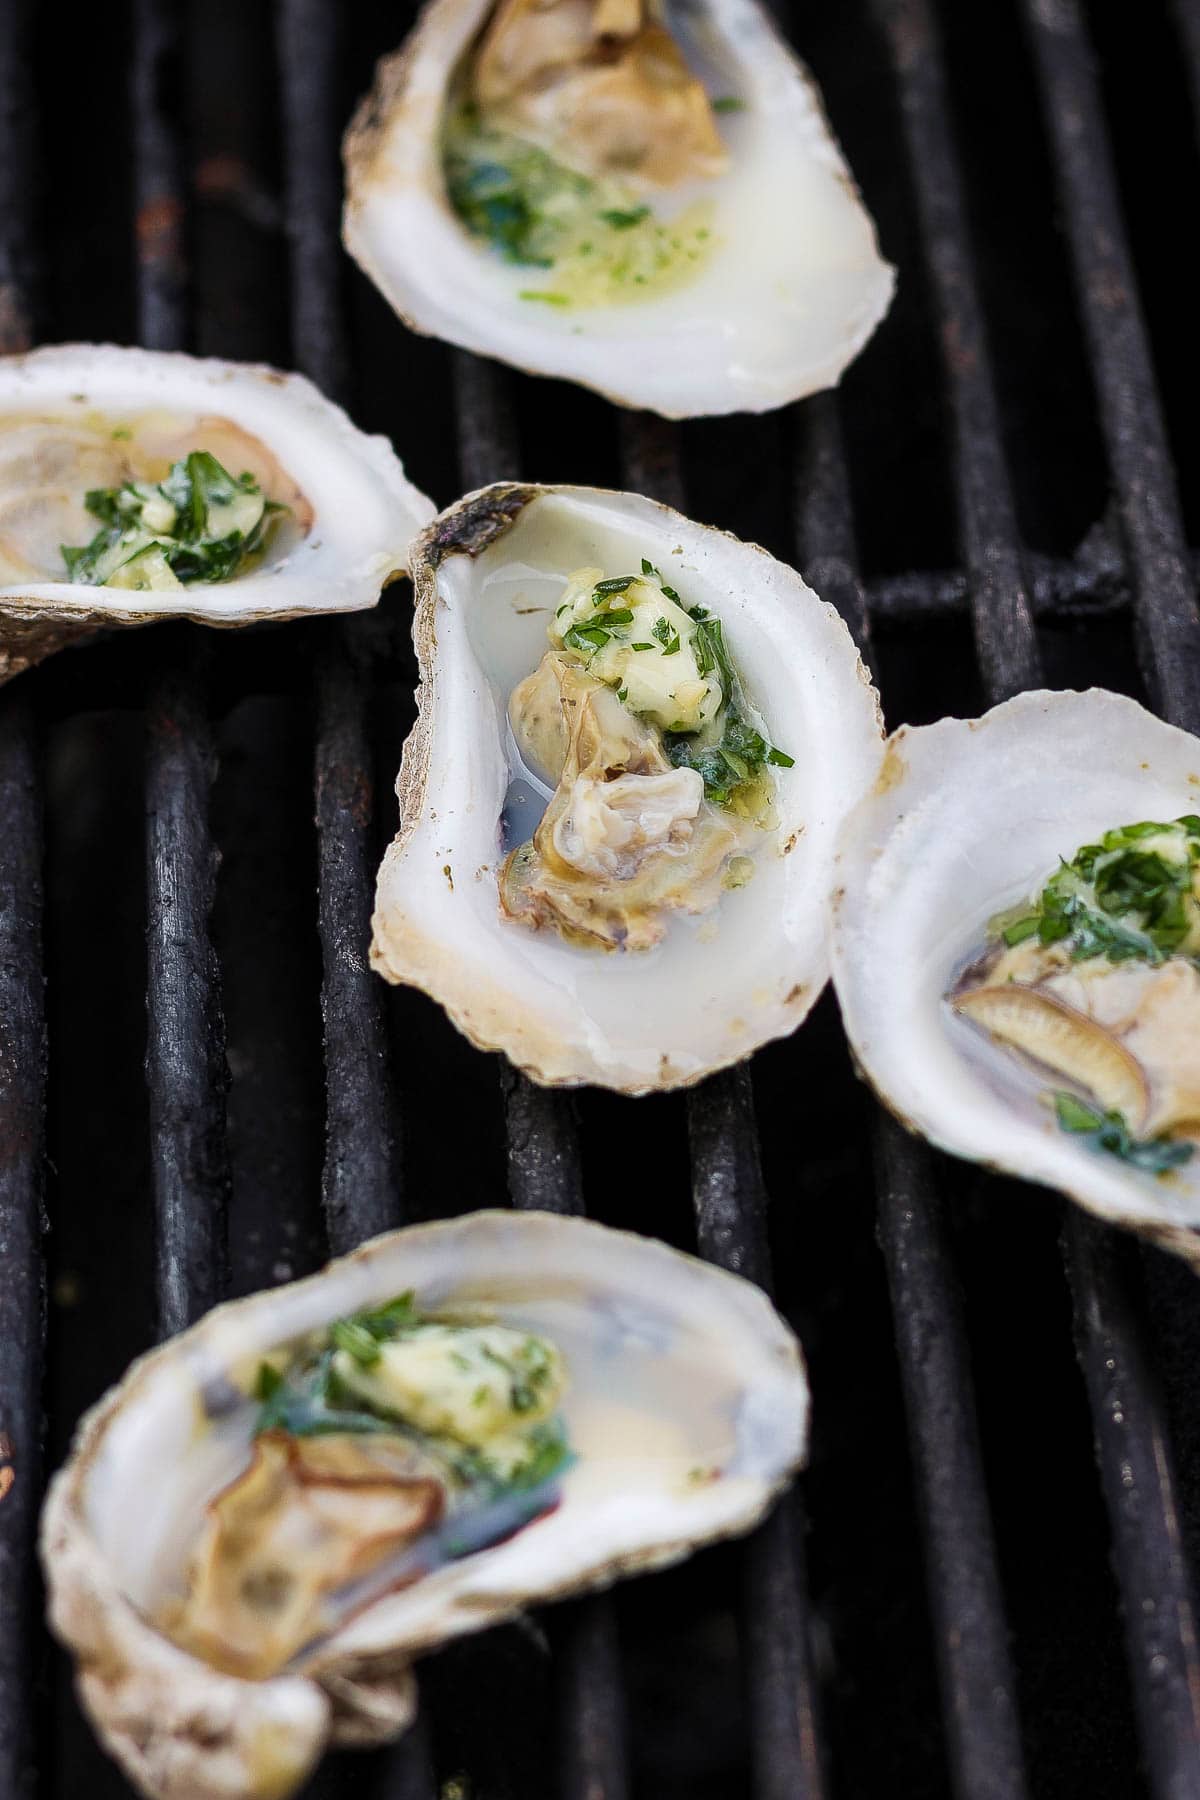 Oyster halves with herby butter in them on the grill grates.